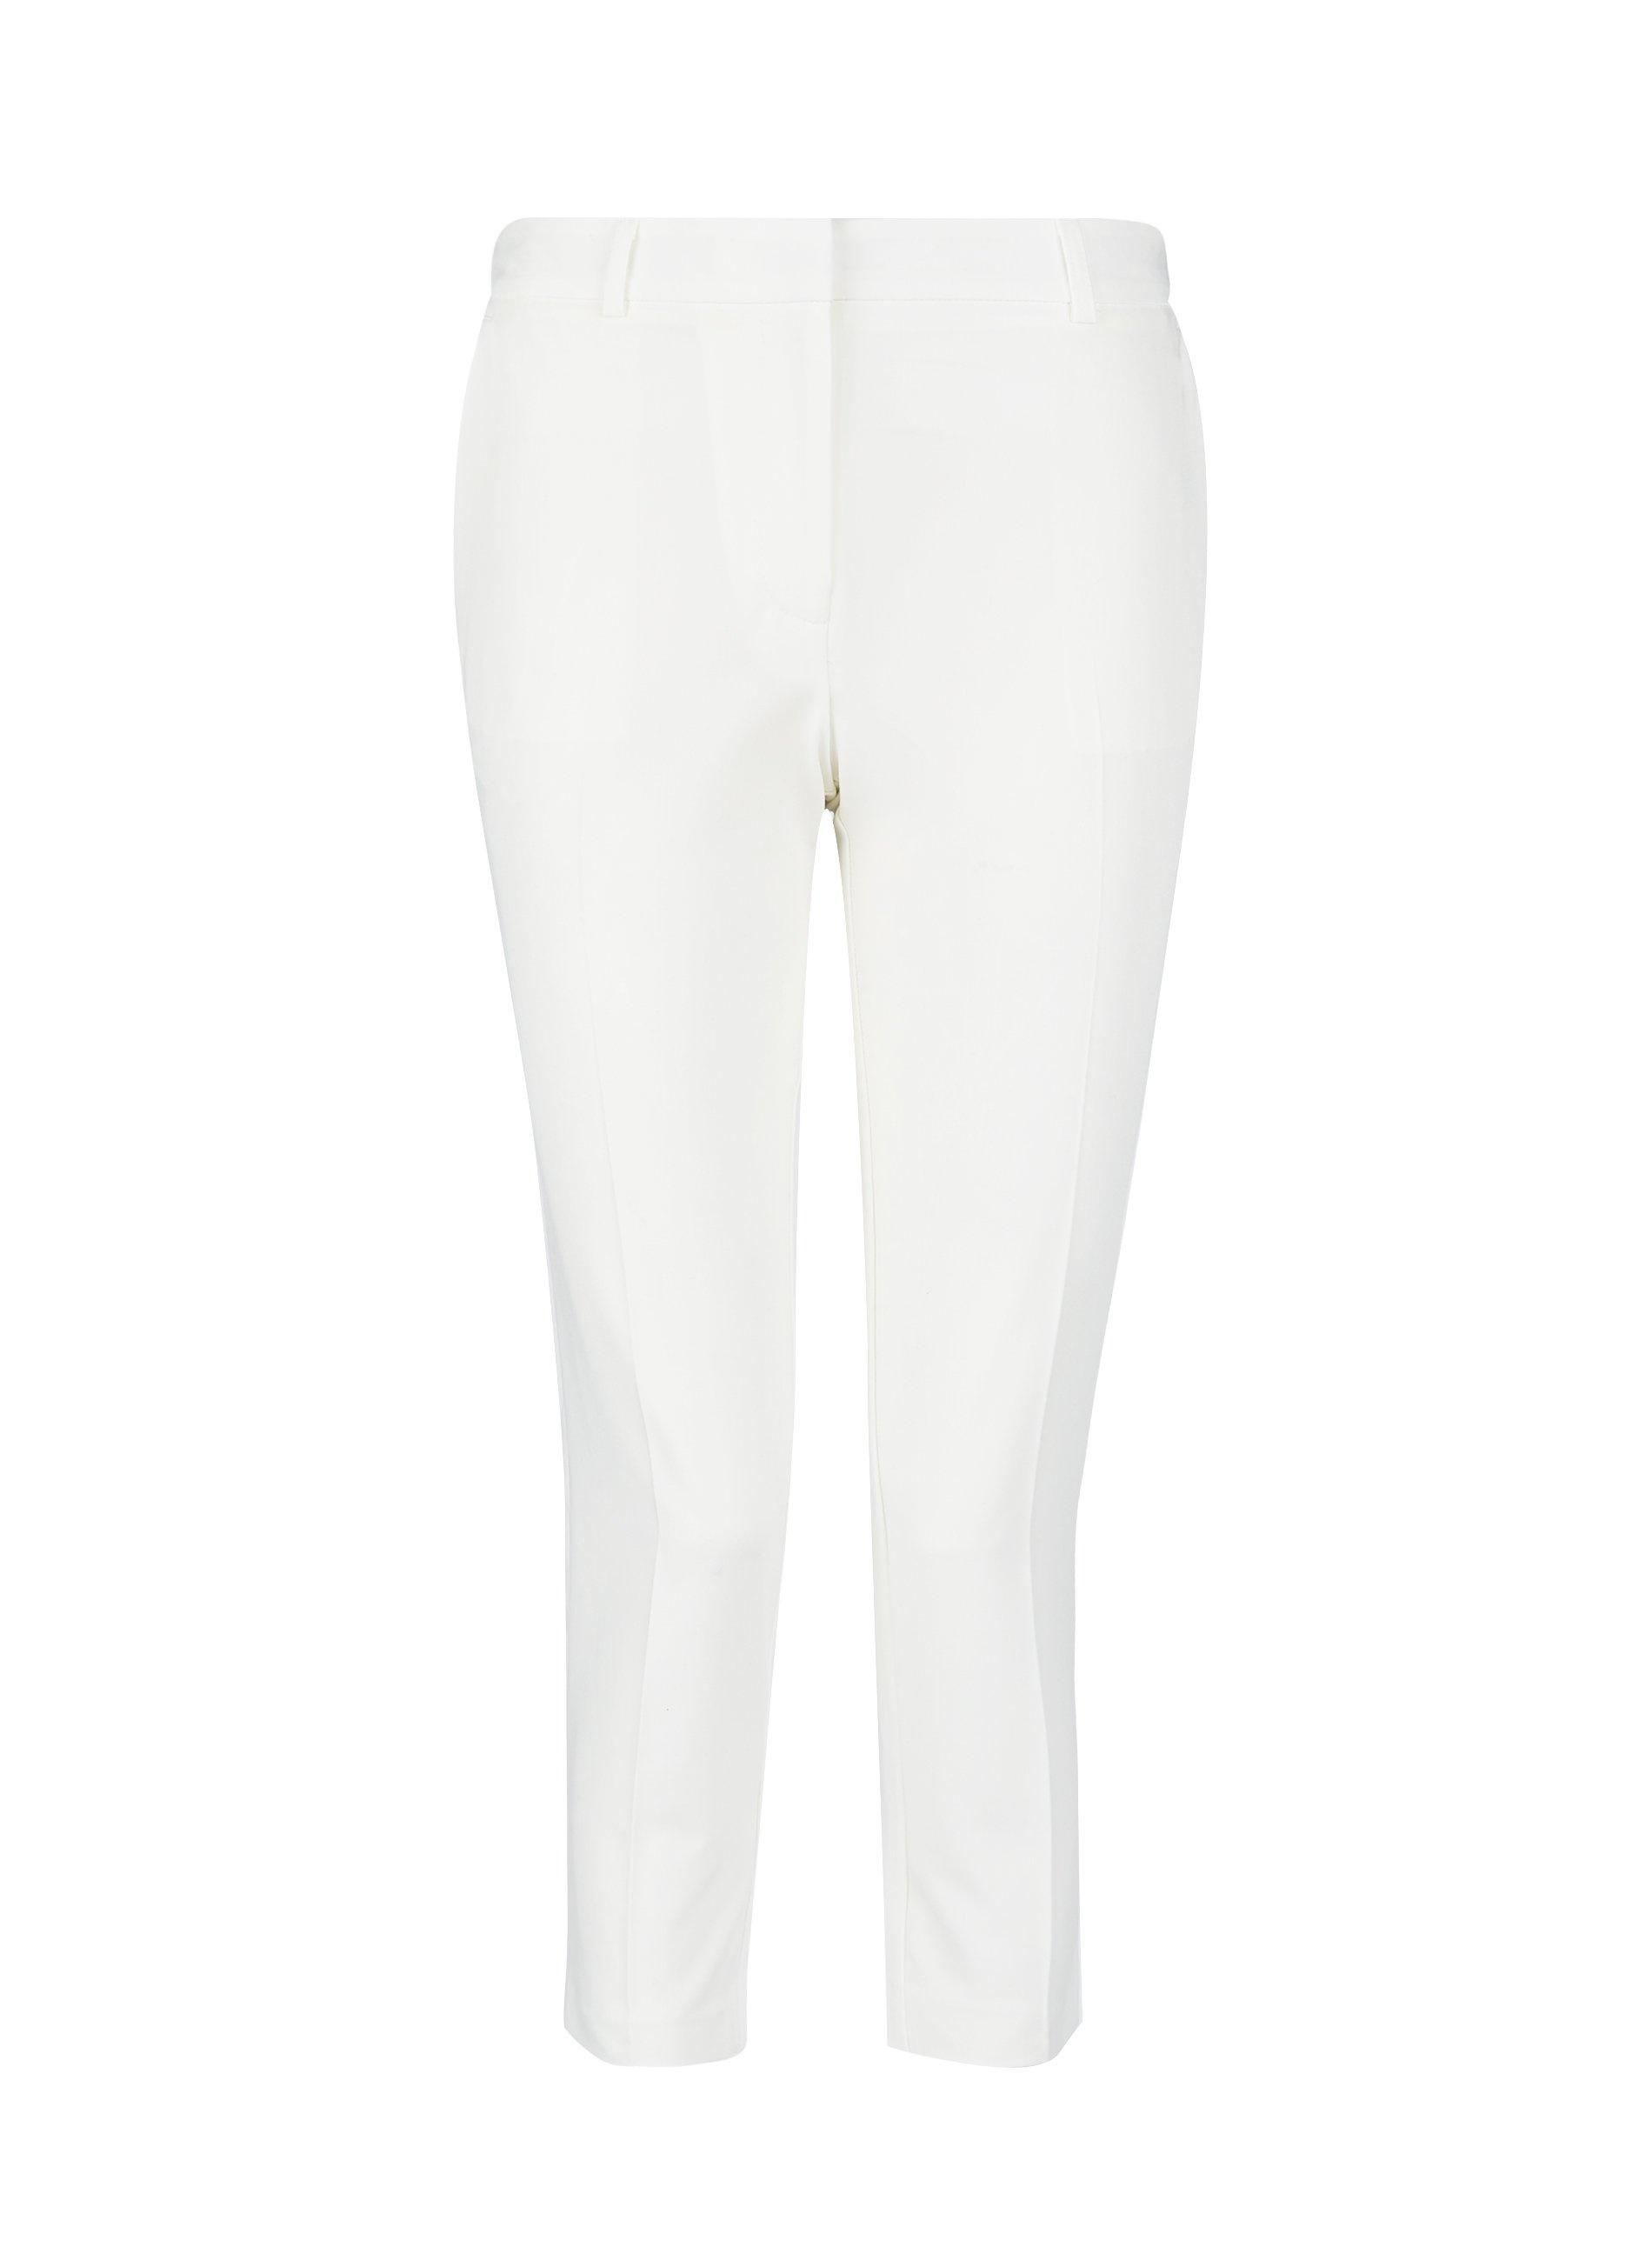 Dorothy Perkins Petite Ivory Naples Ankle Grazer Trousers in White - Lyst